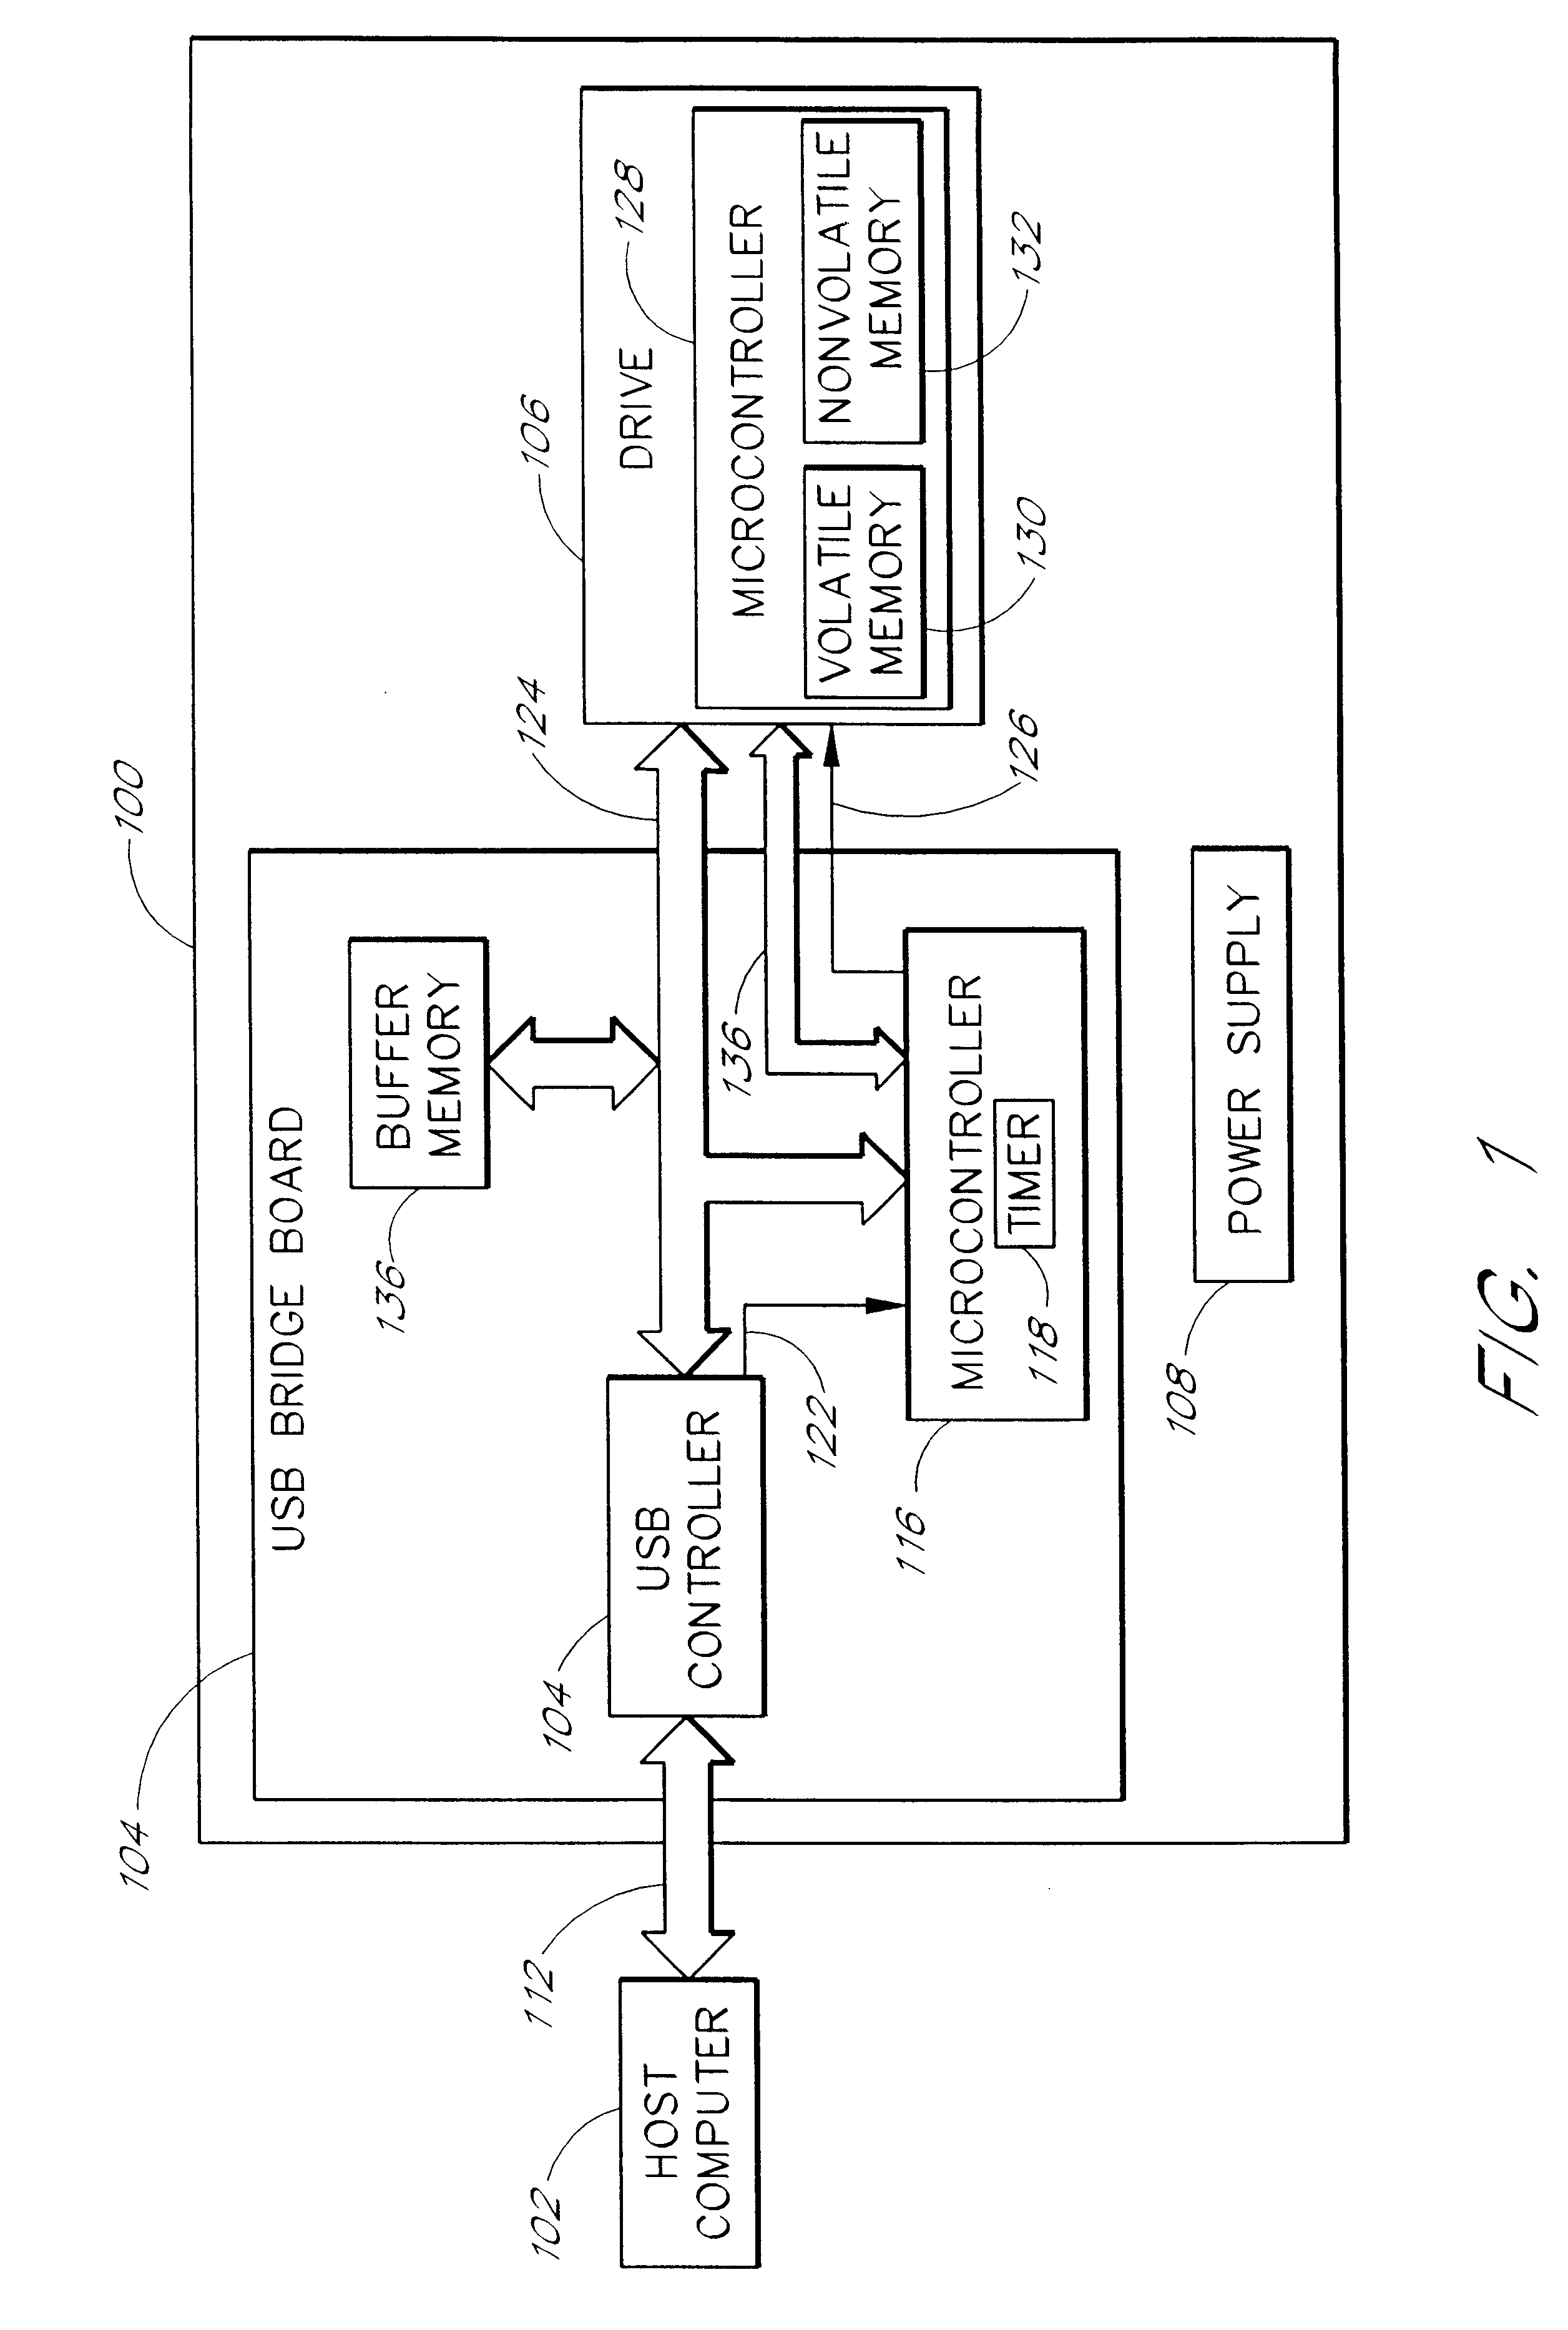 Method and system for performing a peripheral firmware update